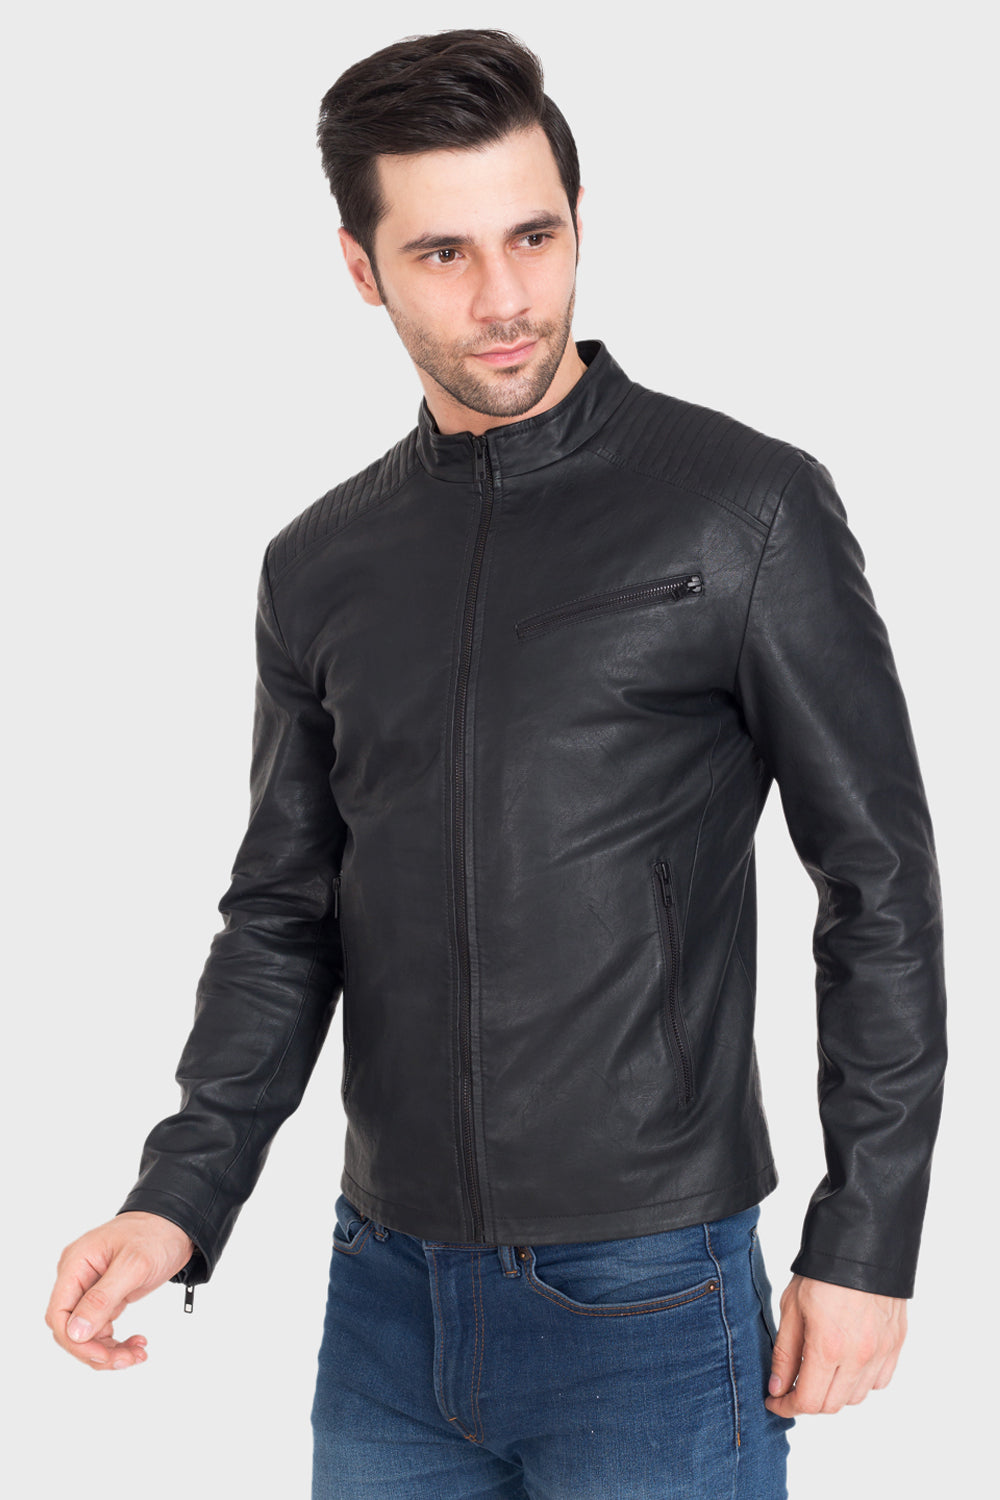 Justanned Rich Black Leather Jacket